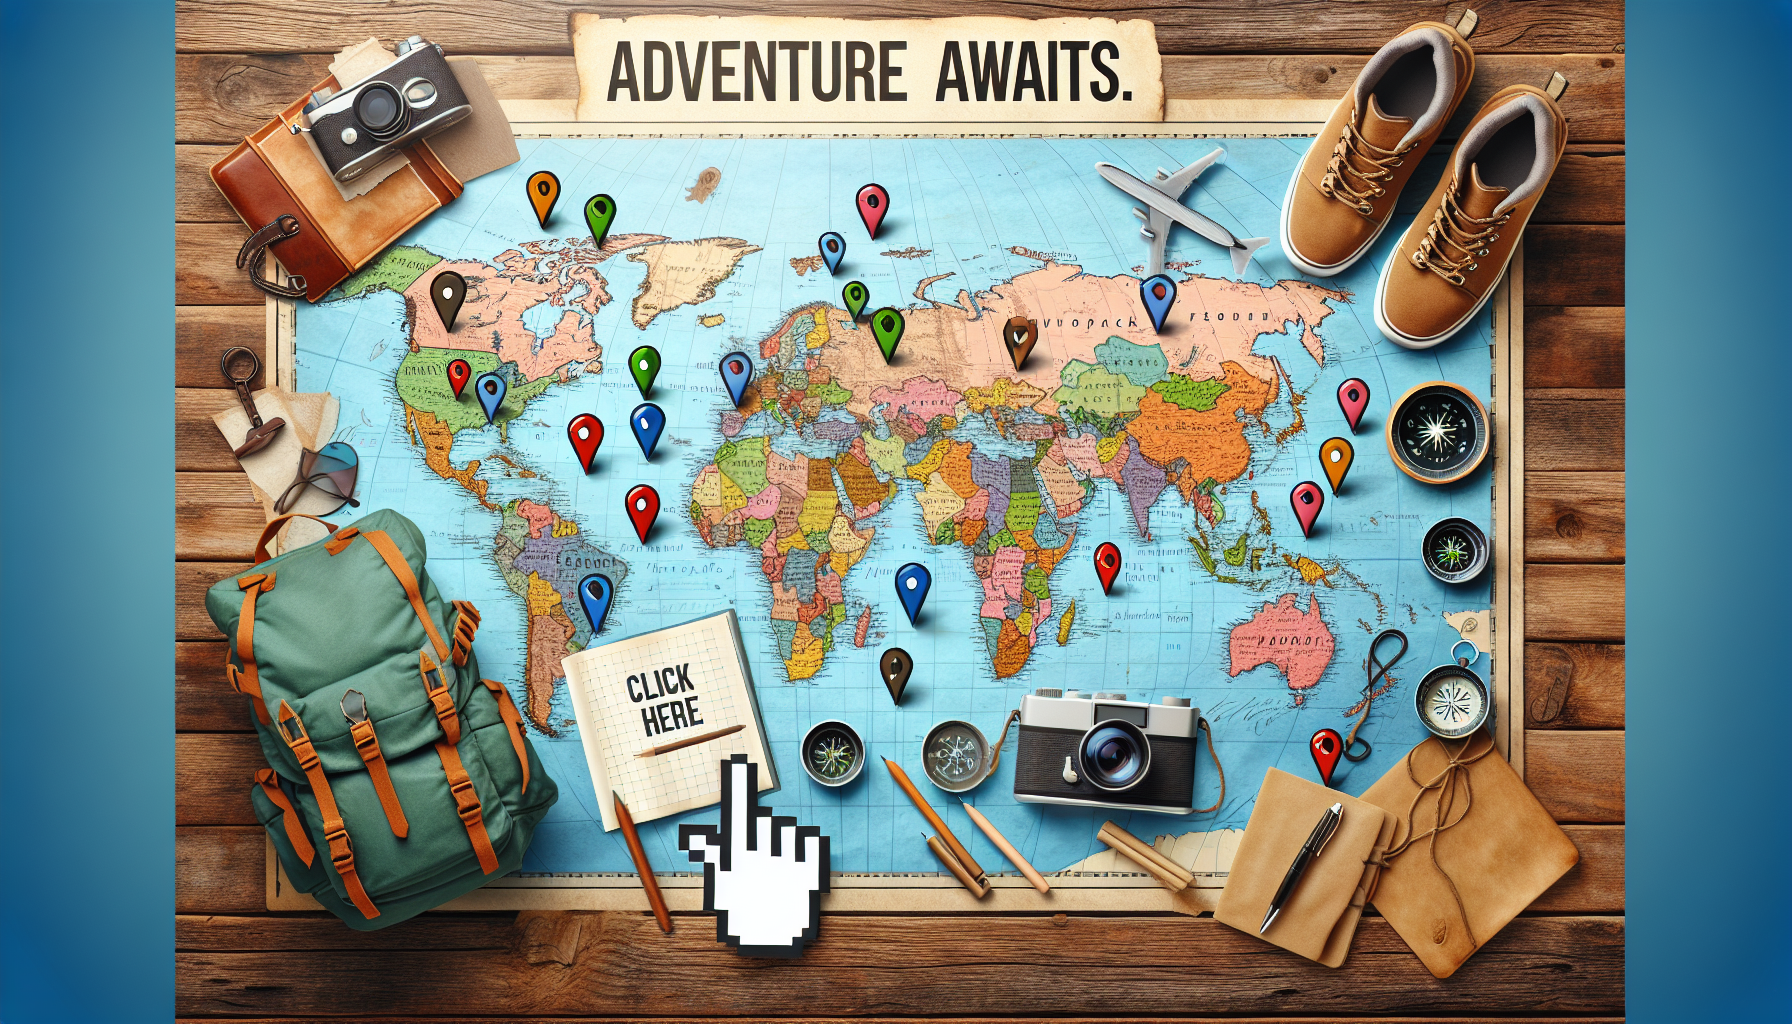 find budget-friendly travel tips for backpackers and discover where to go on vacation with ease. plan your next adventure now!